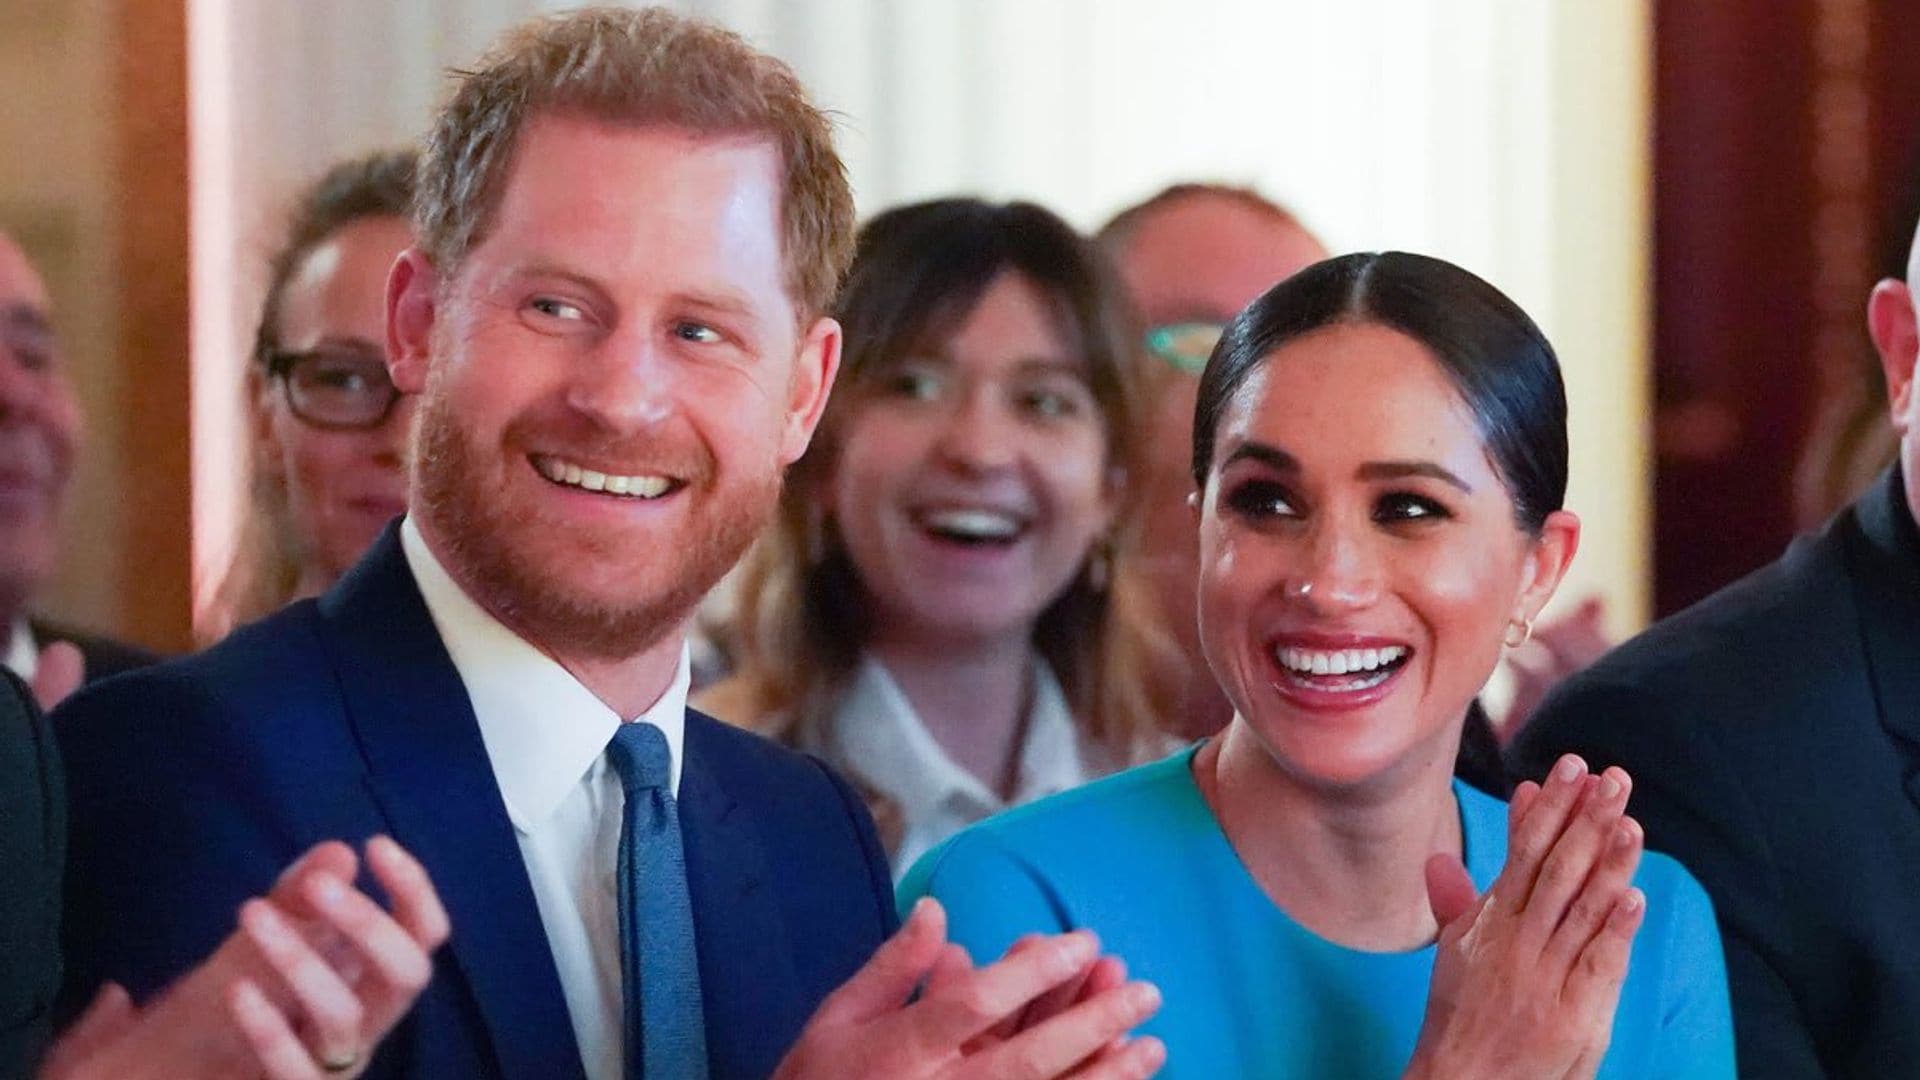 Prince Harry wondered if his cameo in Meghan Markle’s birthday video would be ‘weird’